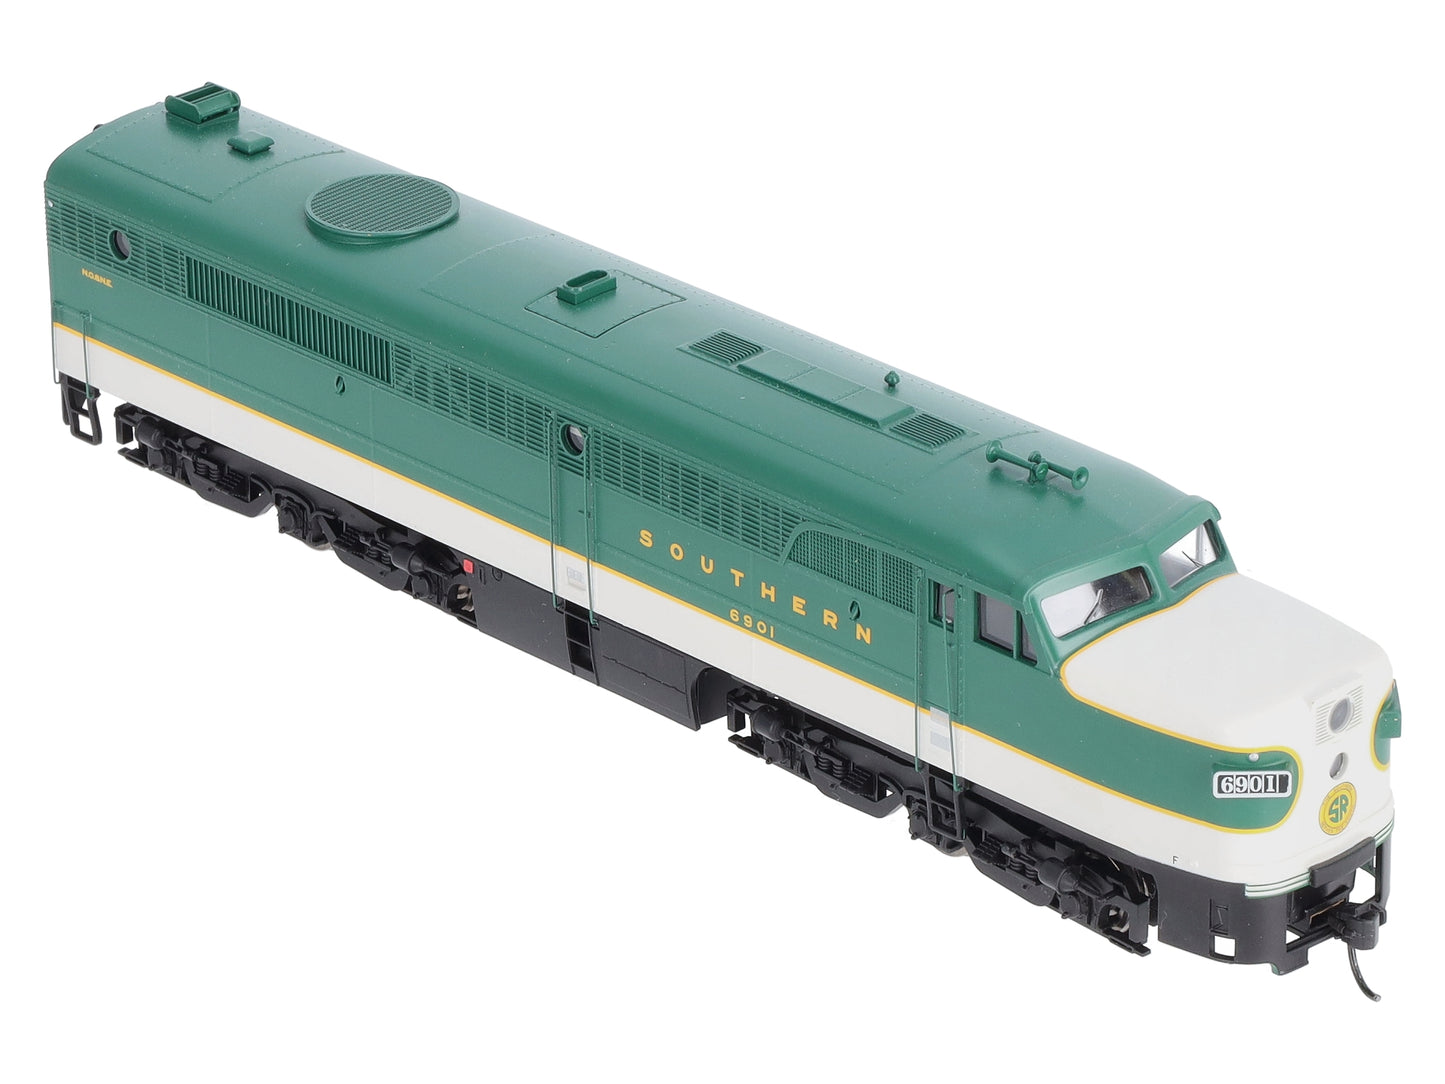 Walthers 910-20091 HO Southern Railway Alco PA Sound & DCC Diesel Loco #6901